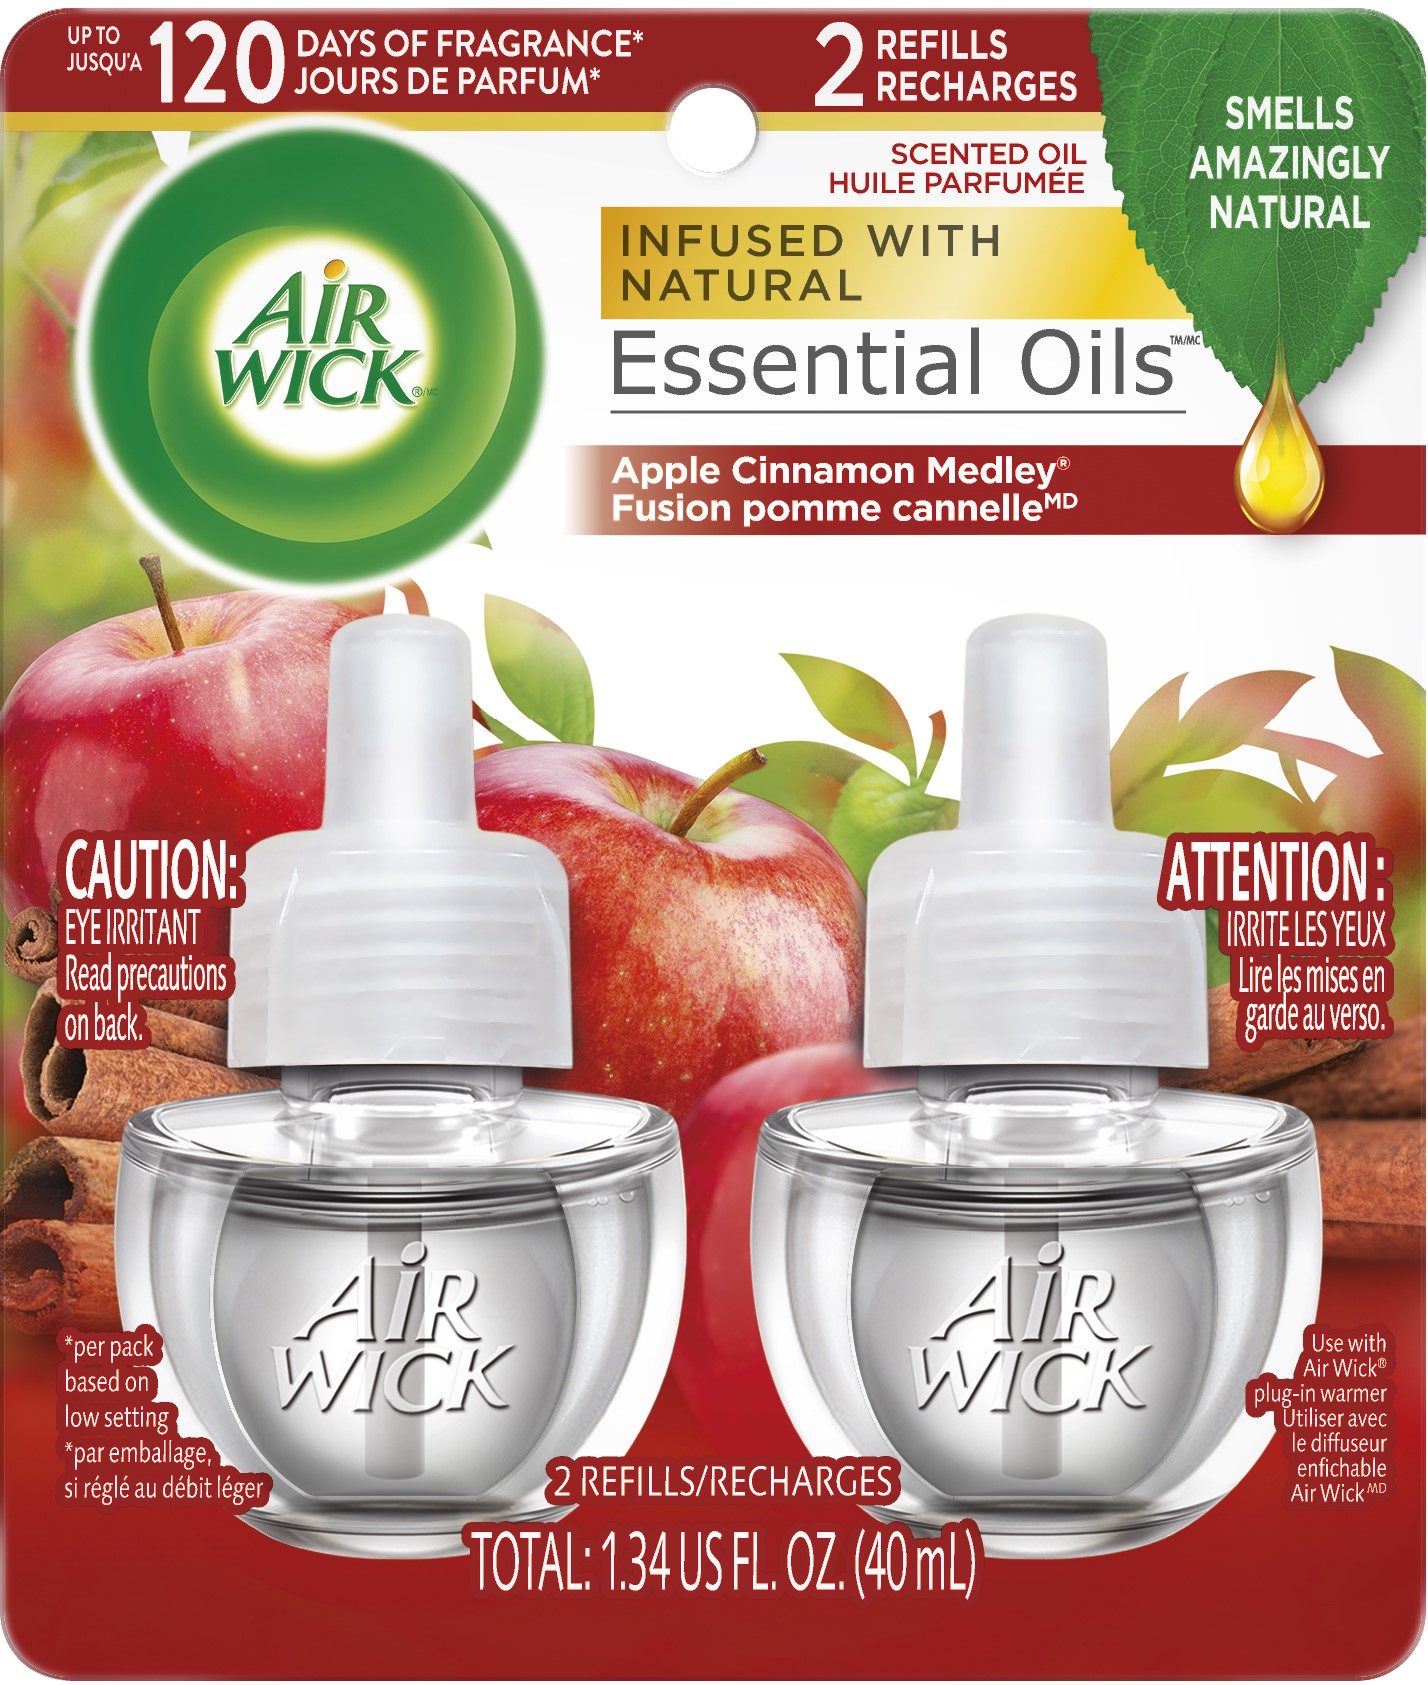 Air Wick Plug in Scented Oil Refill, 2 ct, Apple Cinnamon Medley, Air Freshener, Essential Oils, Fall Scent, Fall decor - image 1 of 12